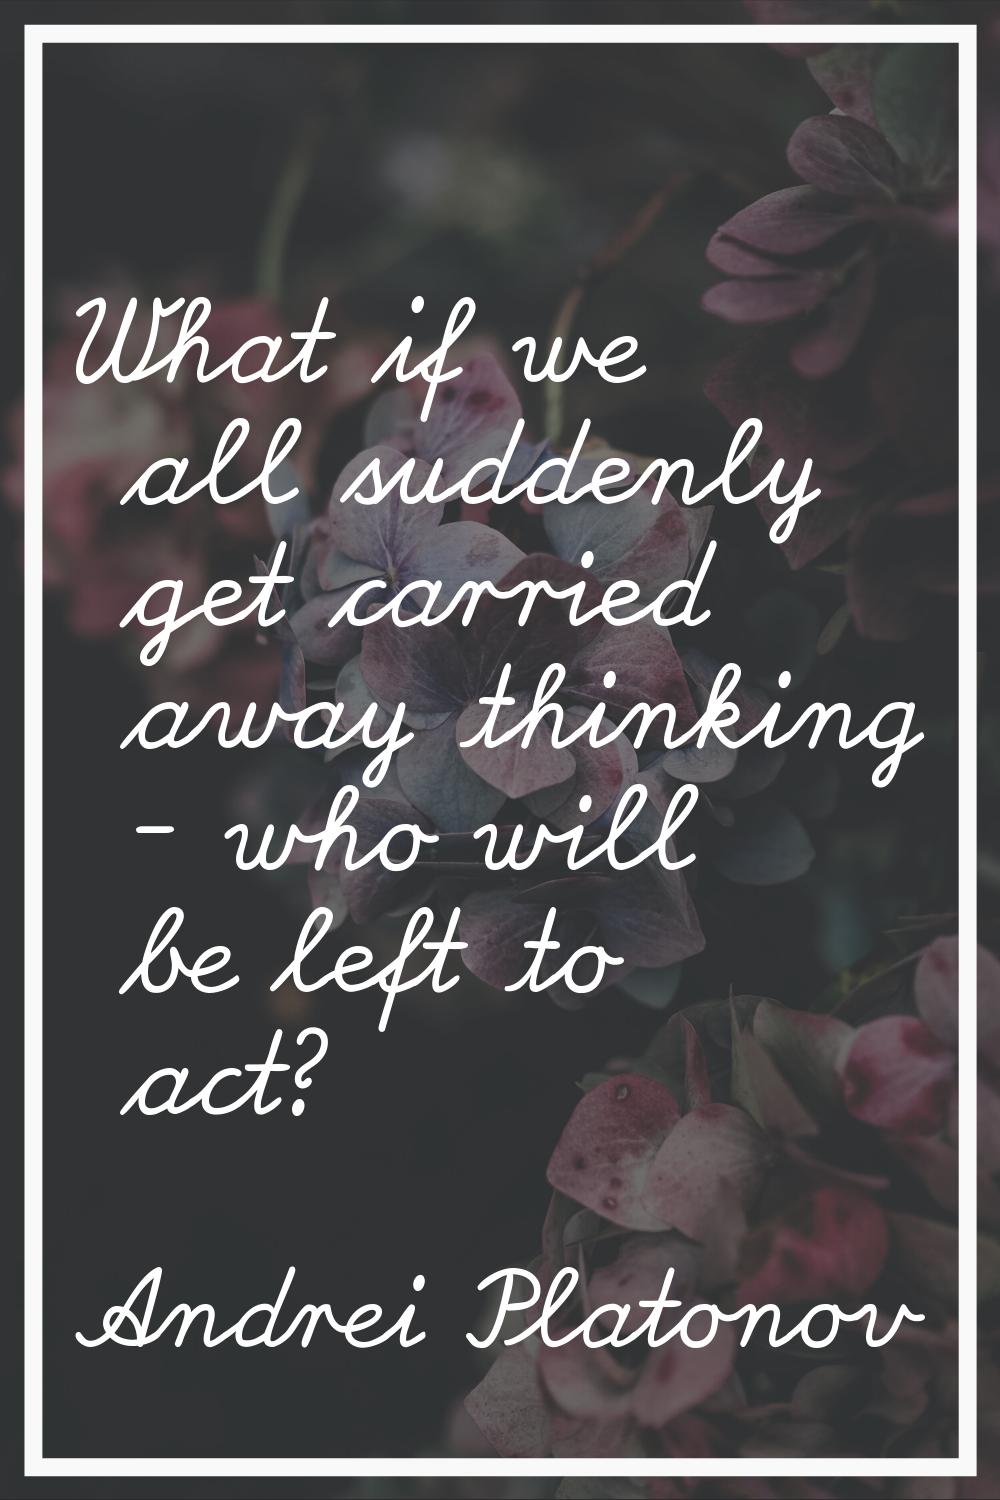 What if we all suddenly get carried away thinking - who will be left to act?